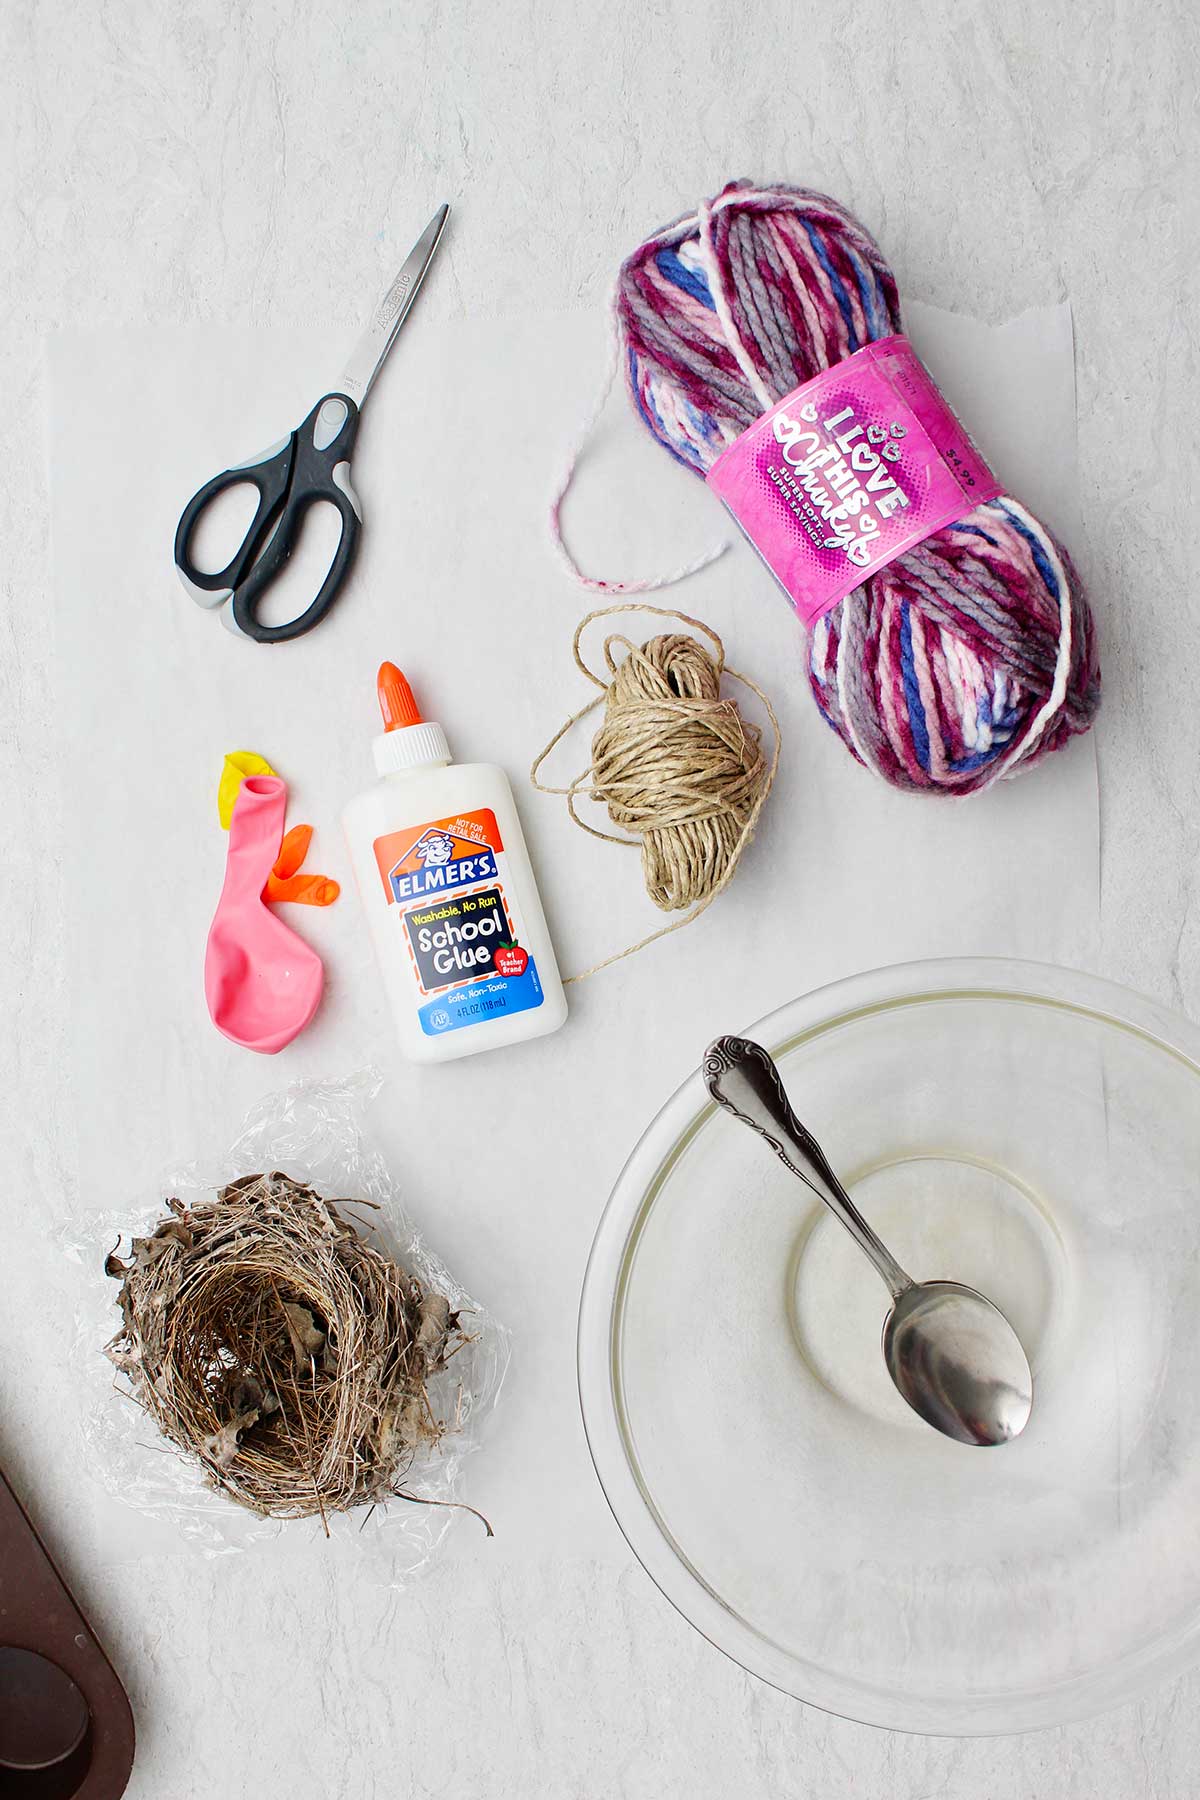 Supplies to make a bird nest out of string. Yarn, twine, a bowl, spoon, balloons, scissors and a real bird nest.